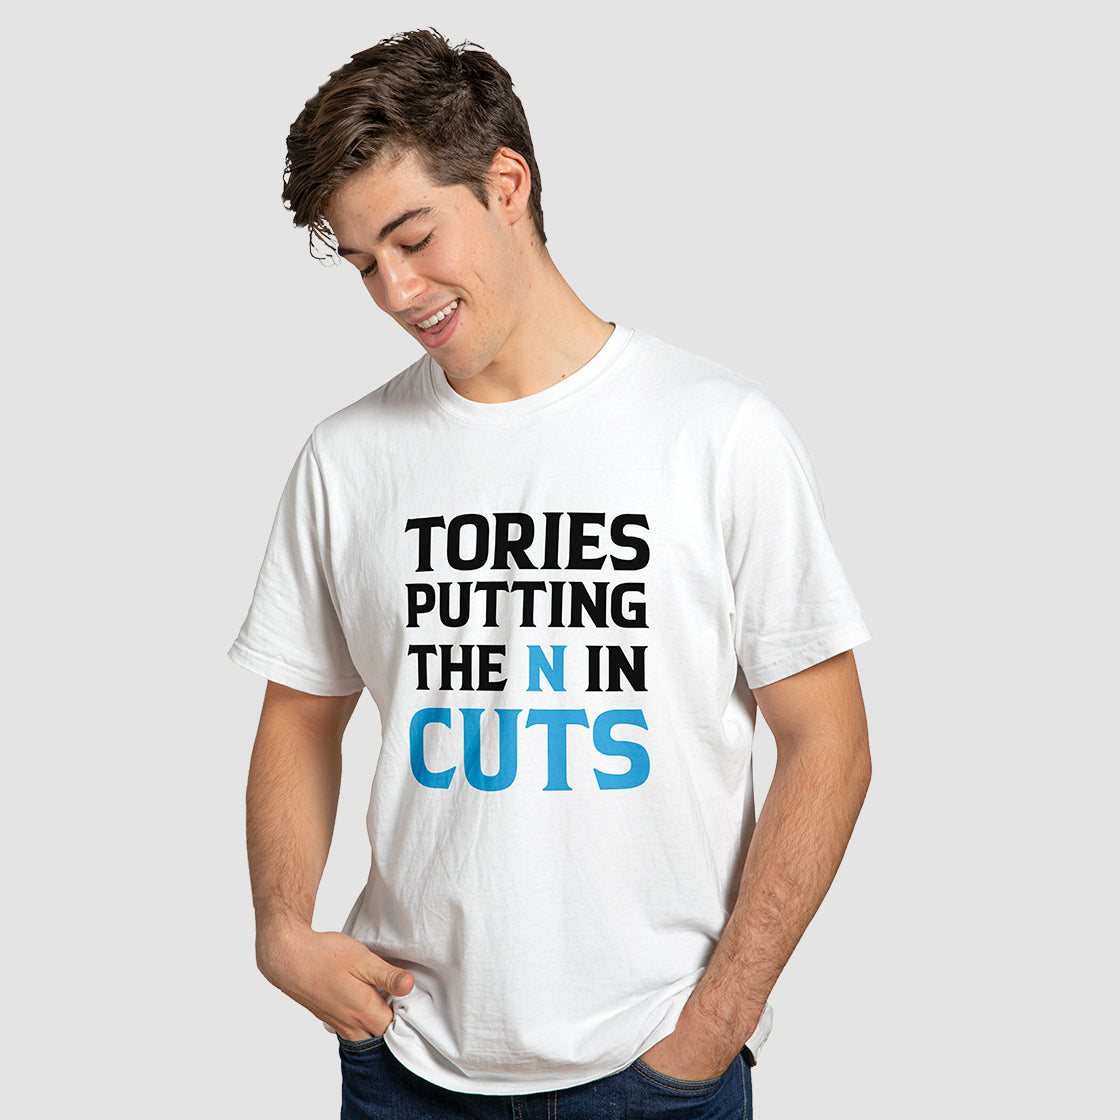 "Tories Putting The N in Cuts" T-Shirt